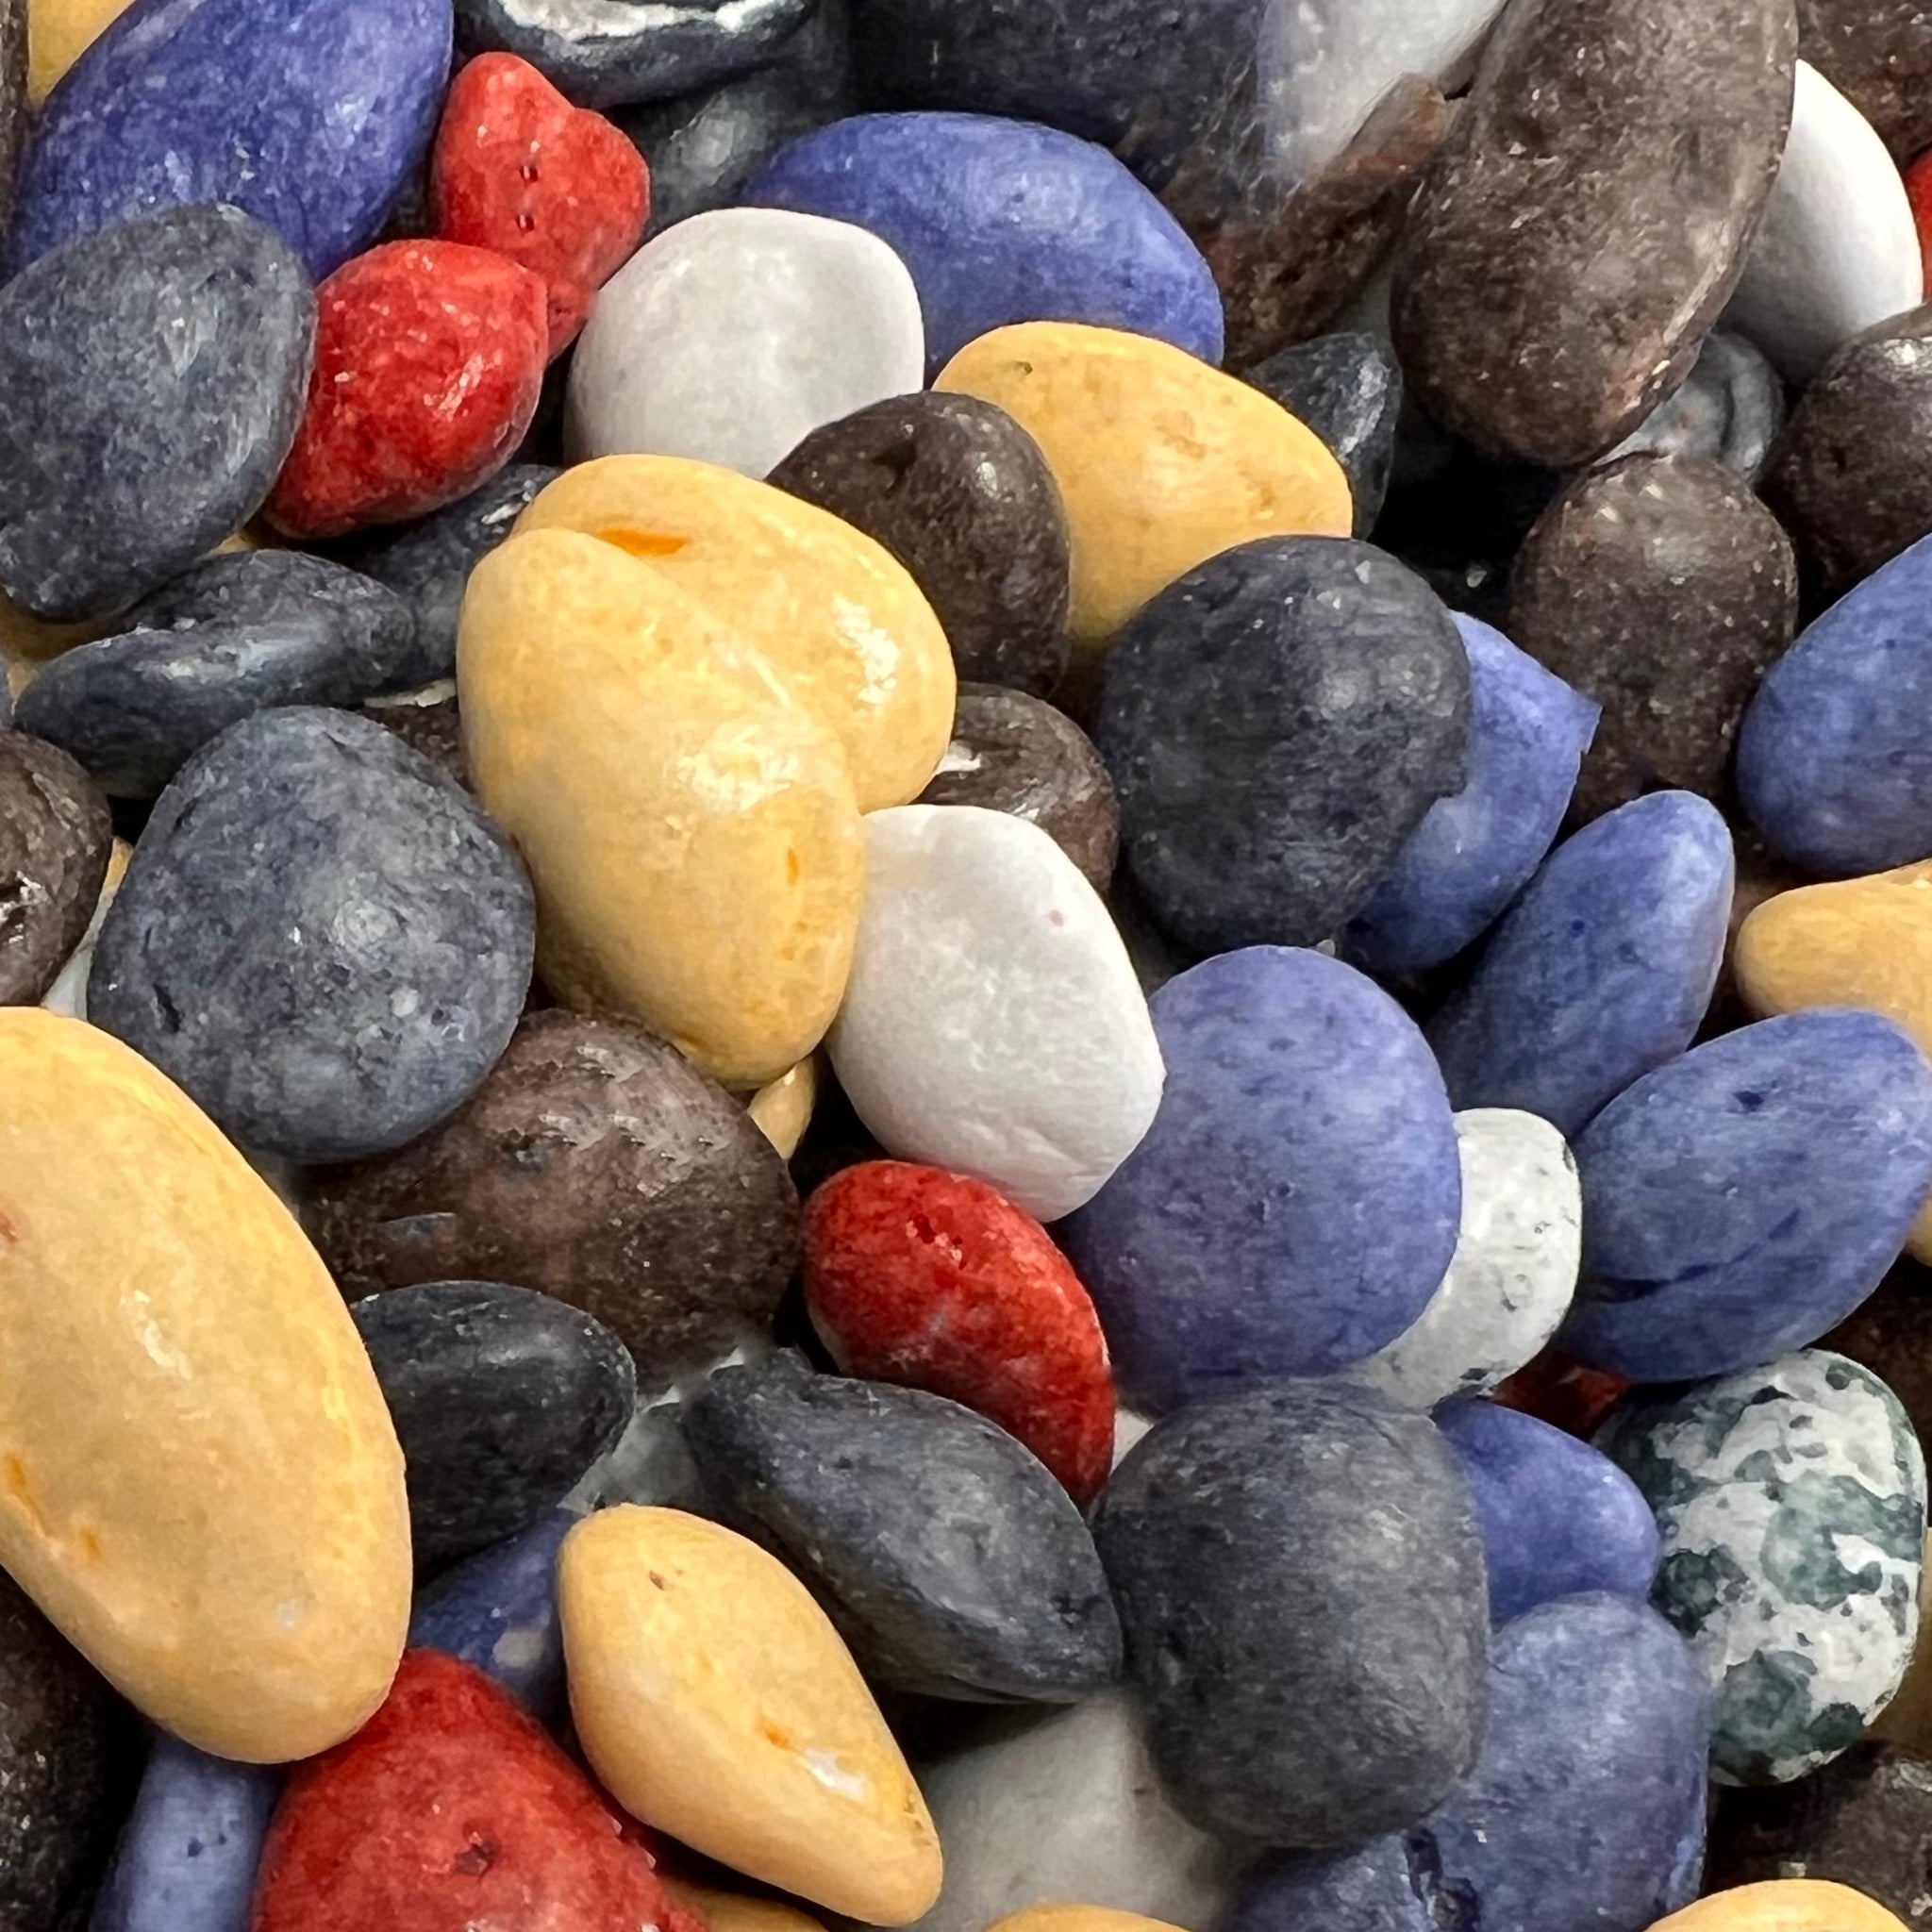 Different round shapes and colors of chocolate river rocks  rocks